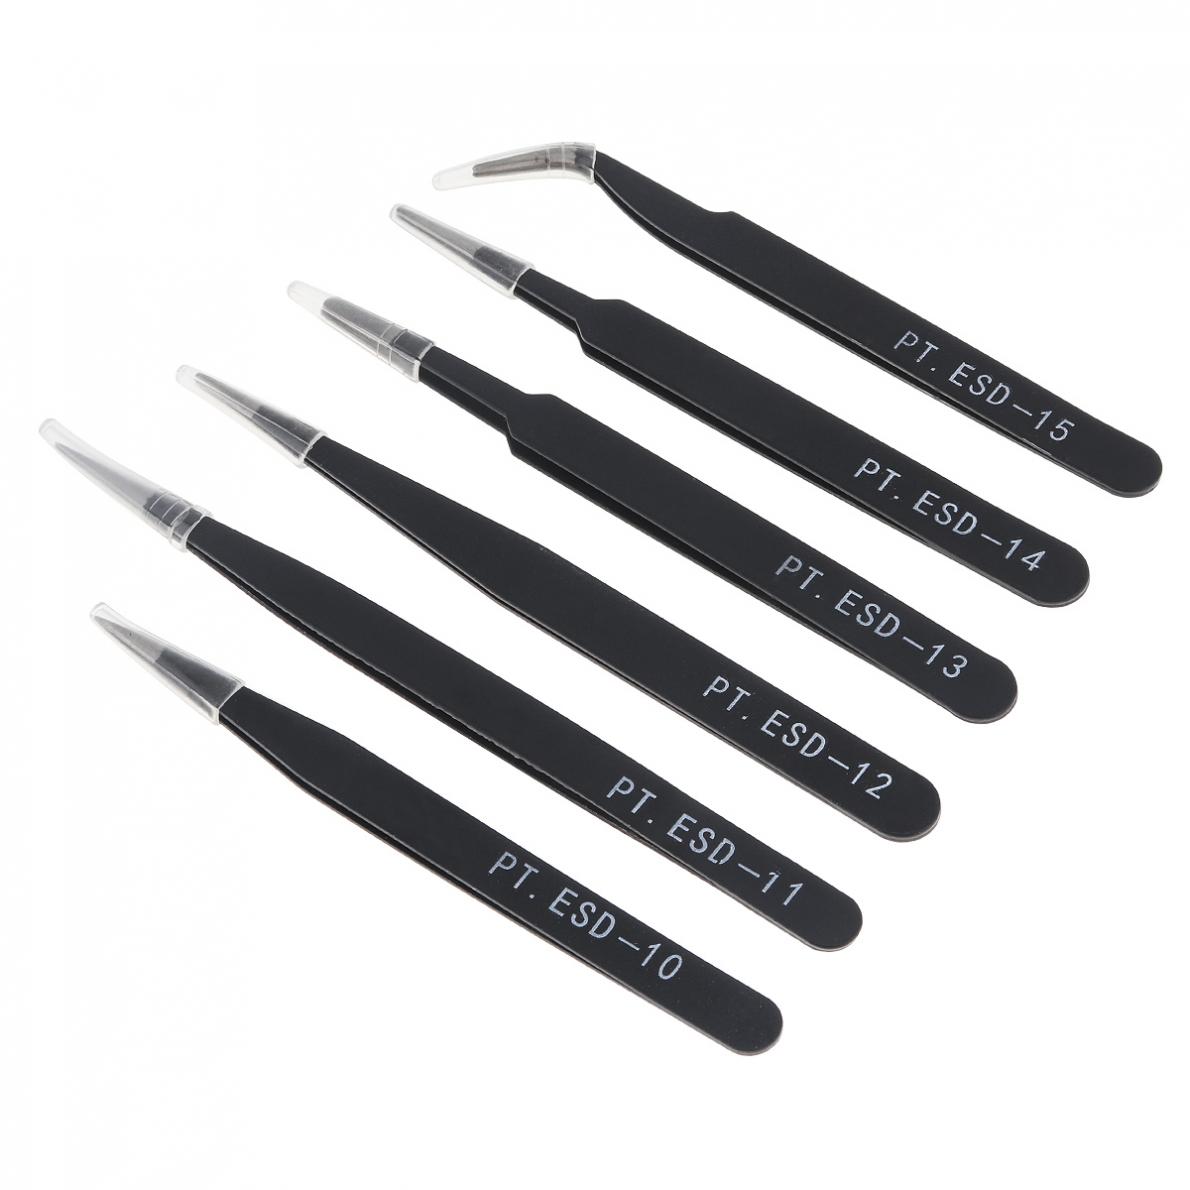 6pcs/lot Anti-static Stainless Steel Tweezers 1.0MM Fix Repair Tool Kit for Electronics Jewelry and Other Fine Crafts